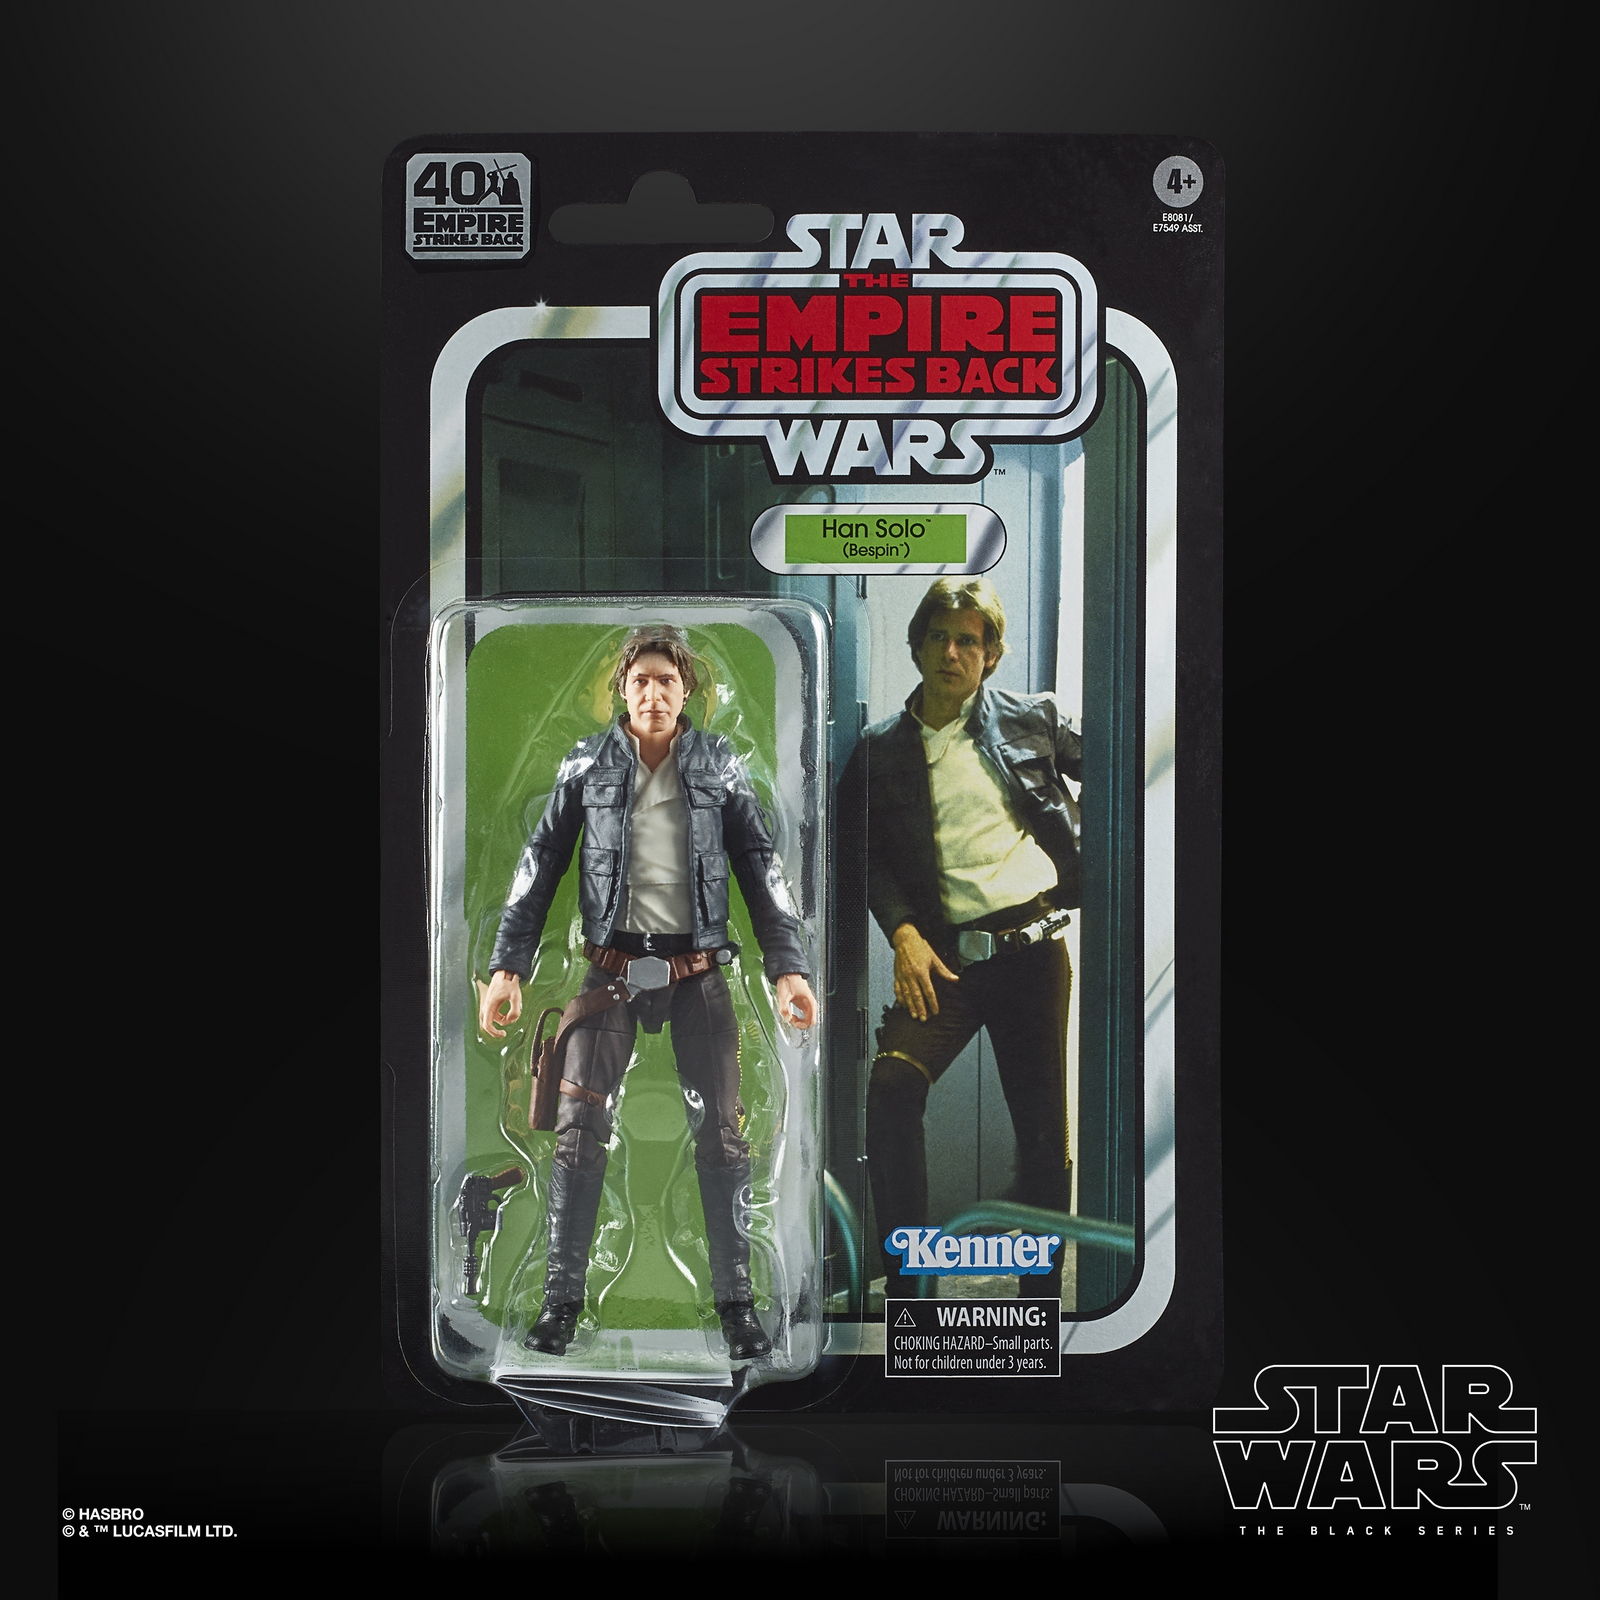 STAR-WARS-THE-BLACK-SERIES-40TH-ANNIVERSARY-6-INCH-HAN-SOLO-(BESPIN)---in-pck.jpg